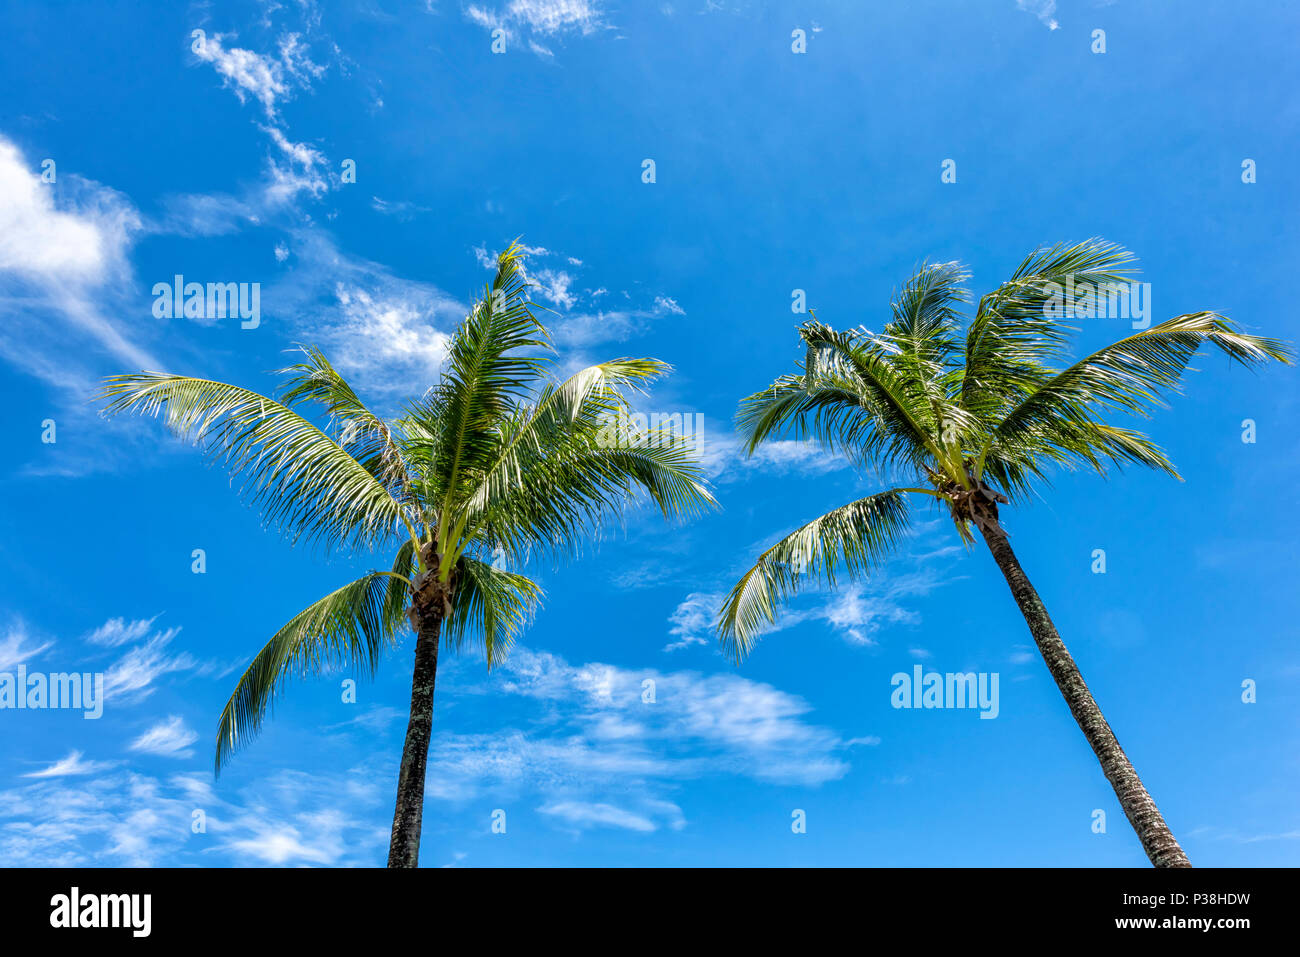 Two Palm Trees pictured against a bright blue sky at Kota Kinabalu, Borneo, Malaysia Stock Photo